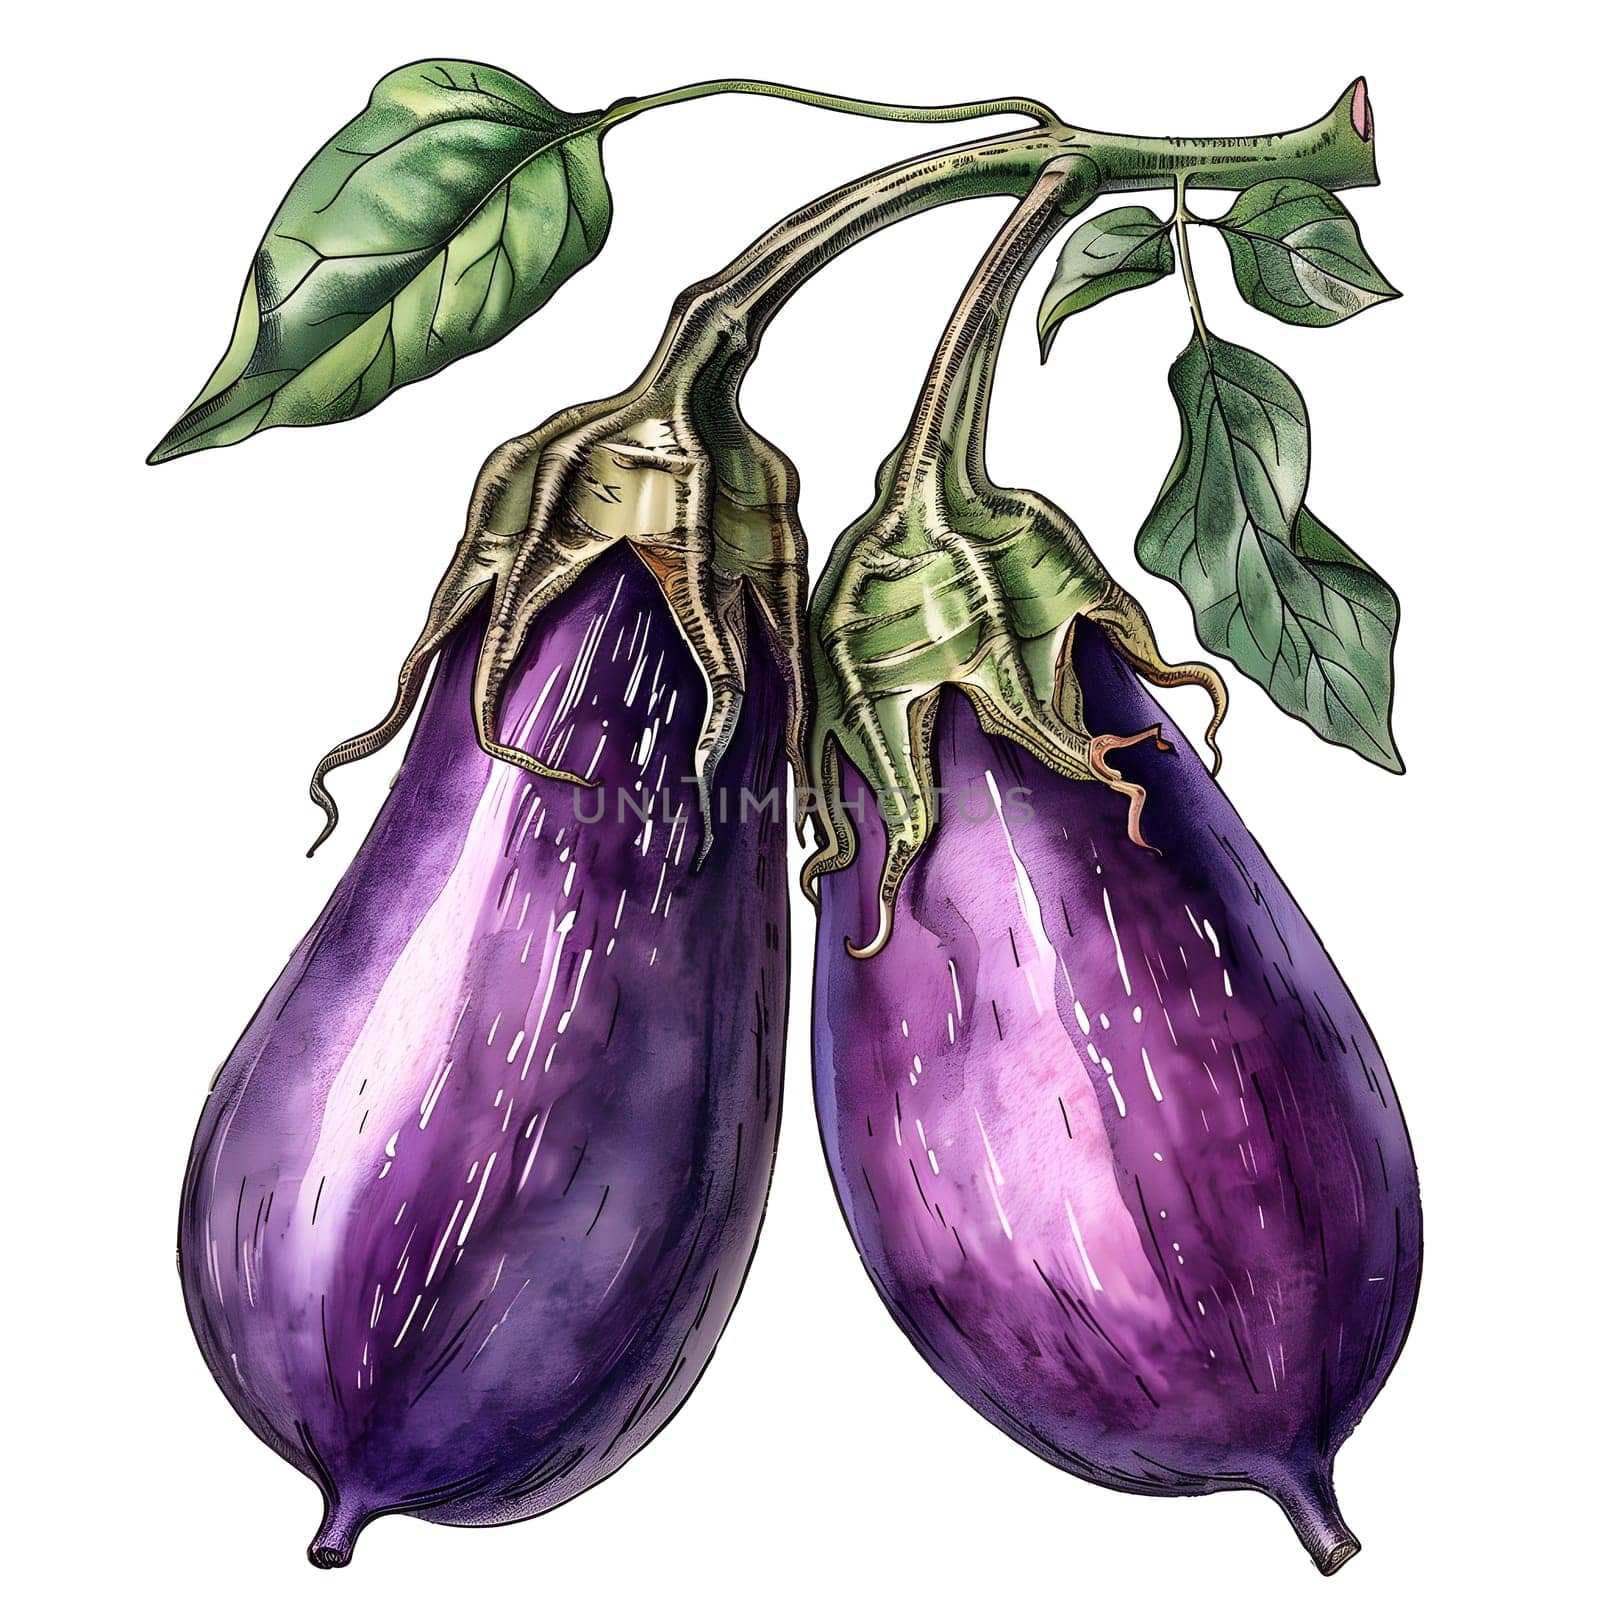 two purple eggplants with green leaves hanging from a vine by Nadtochiy